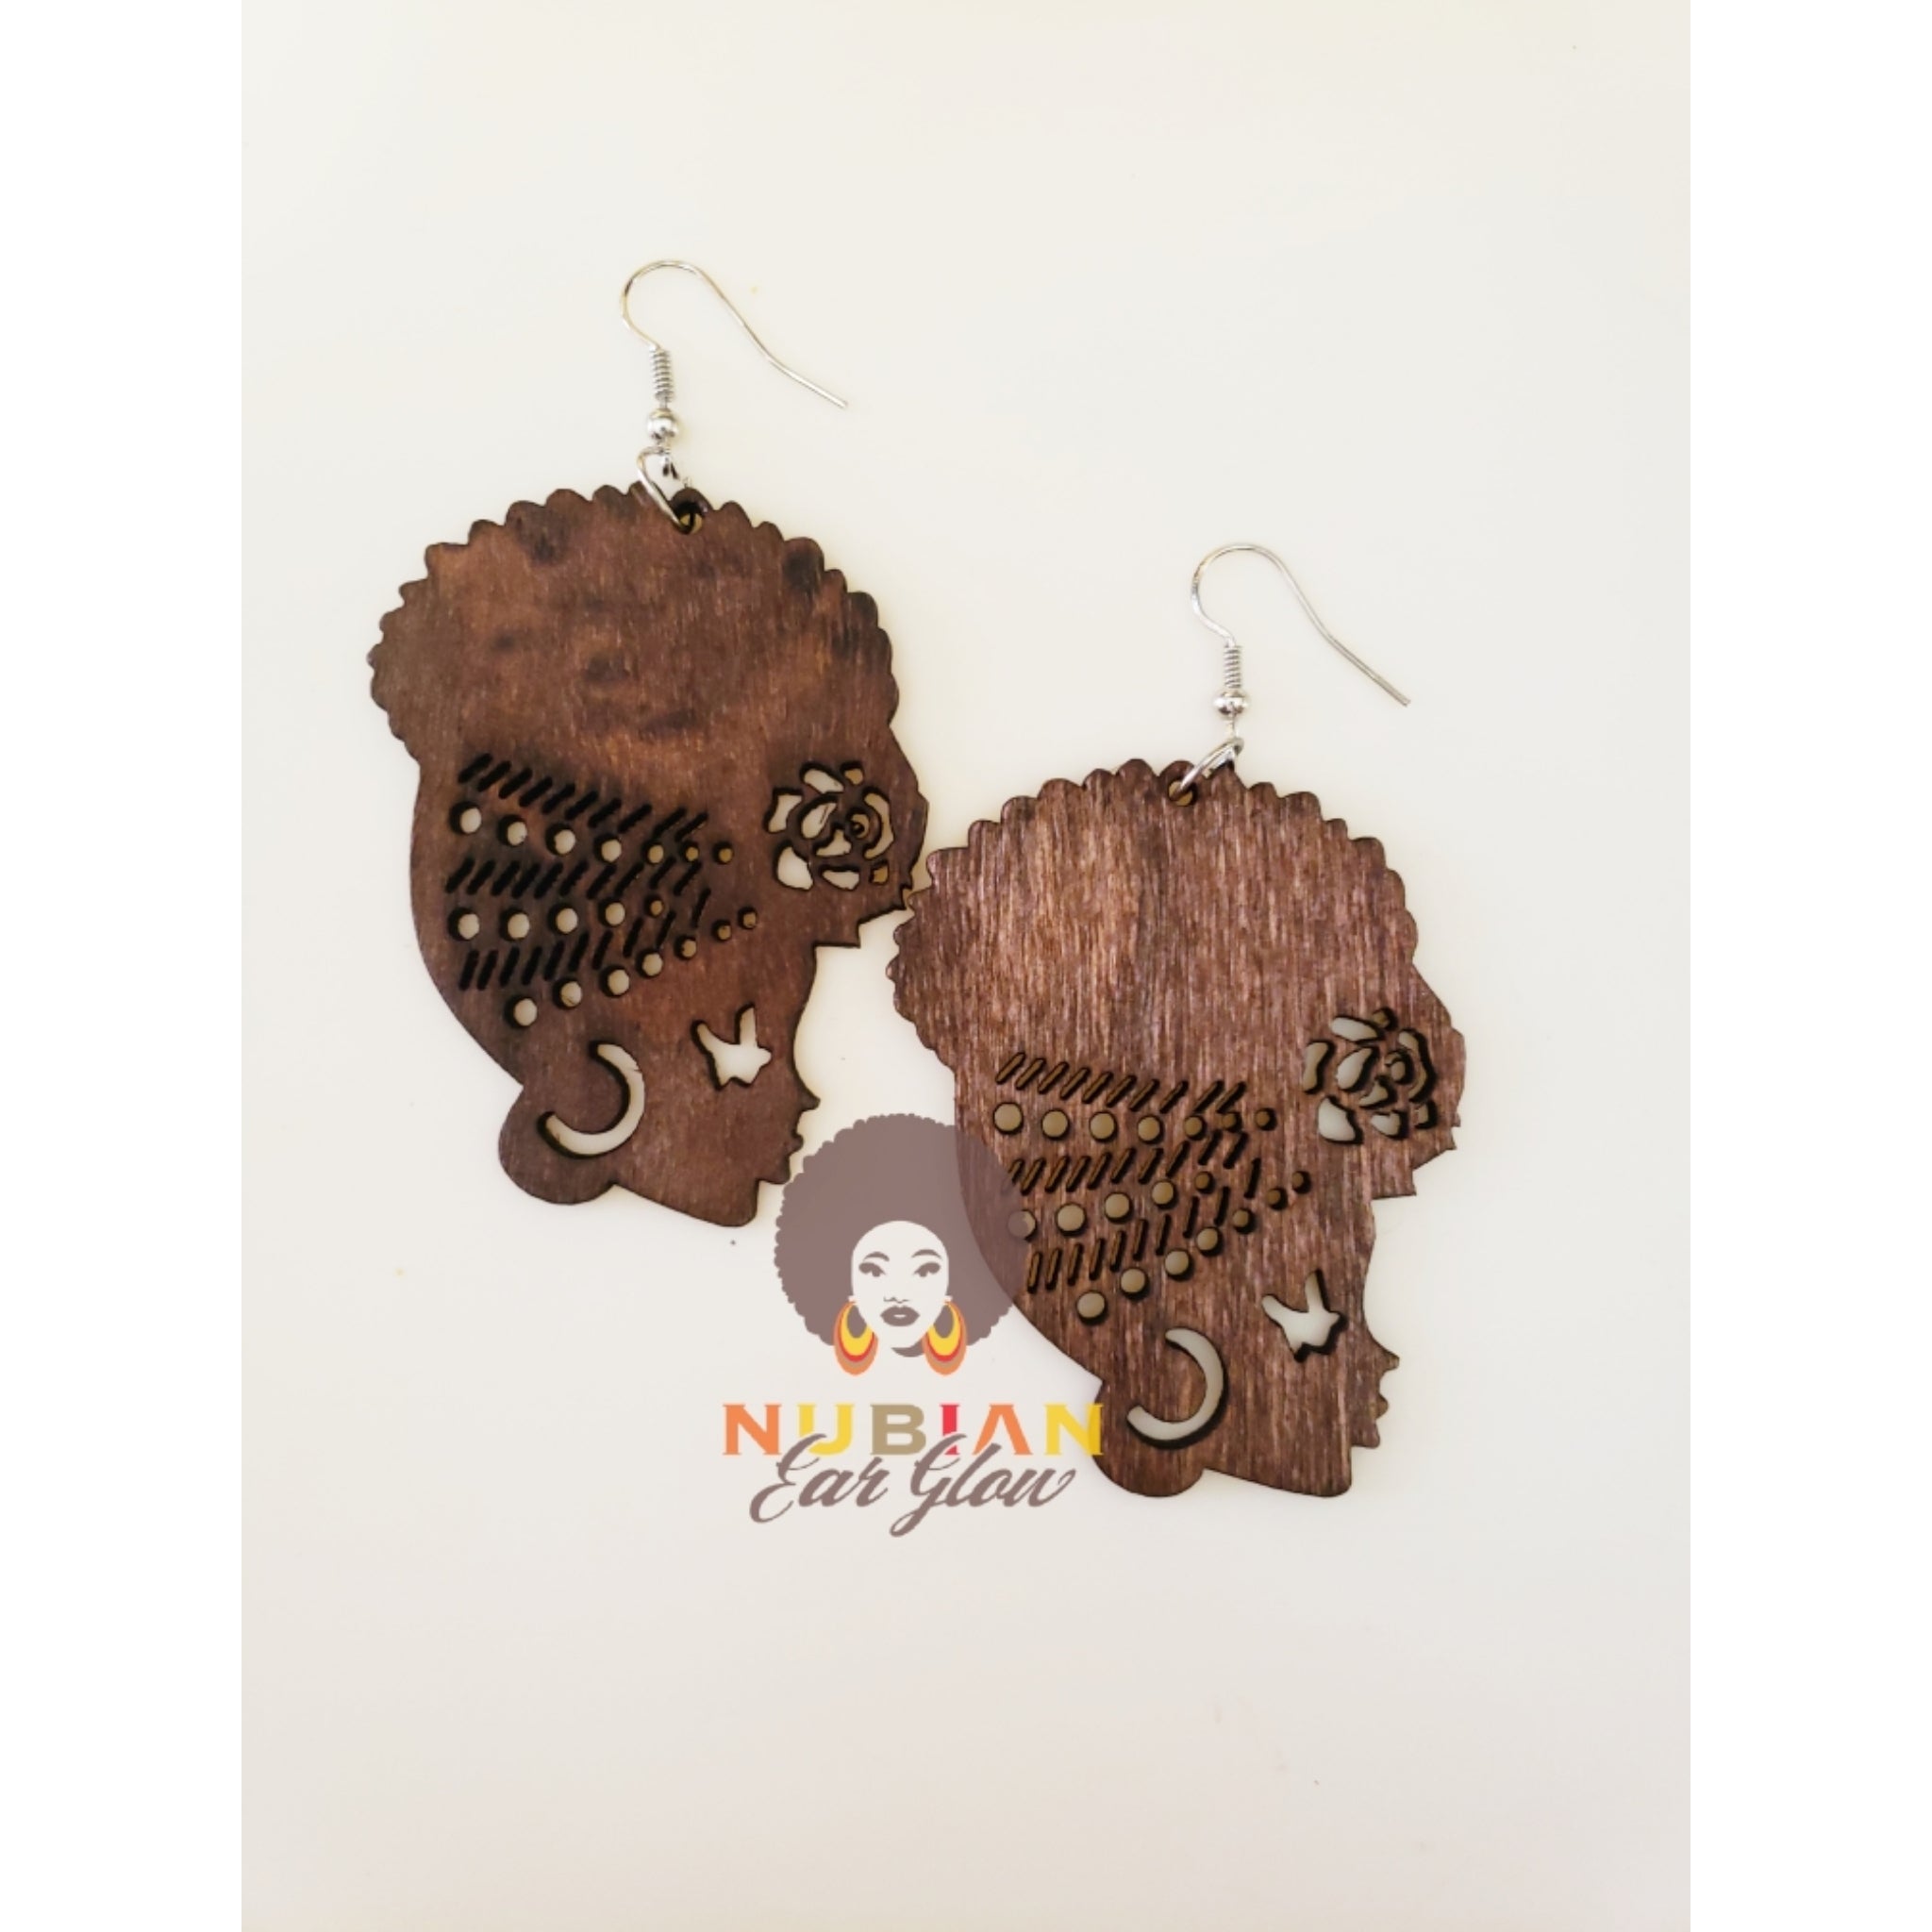 Headwrap and Fro Earring